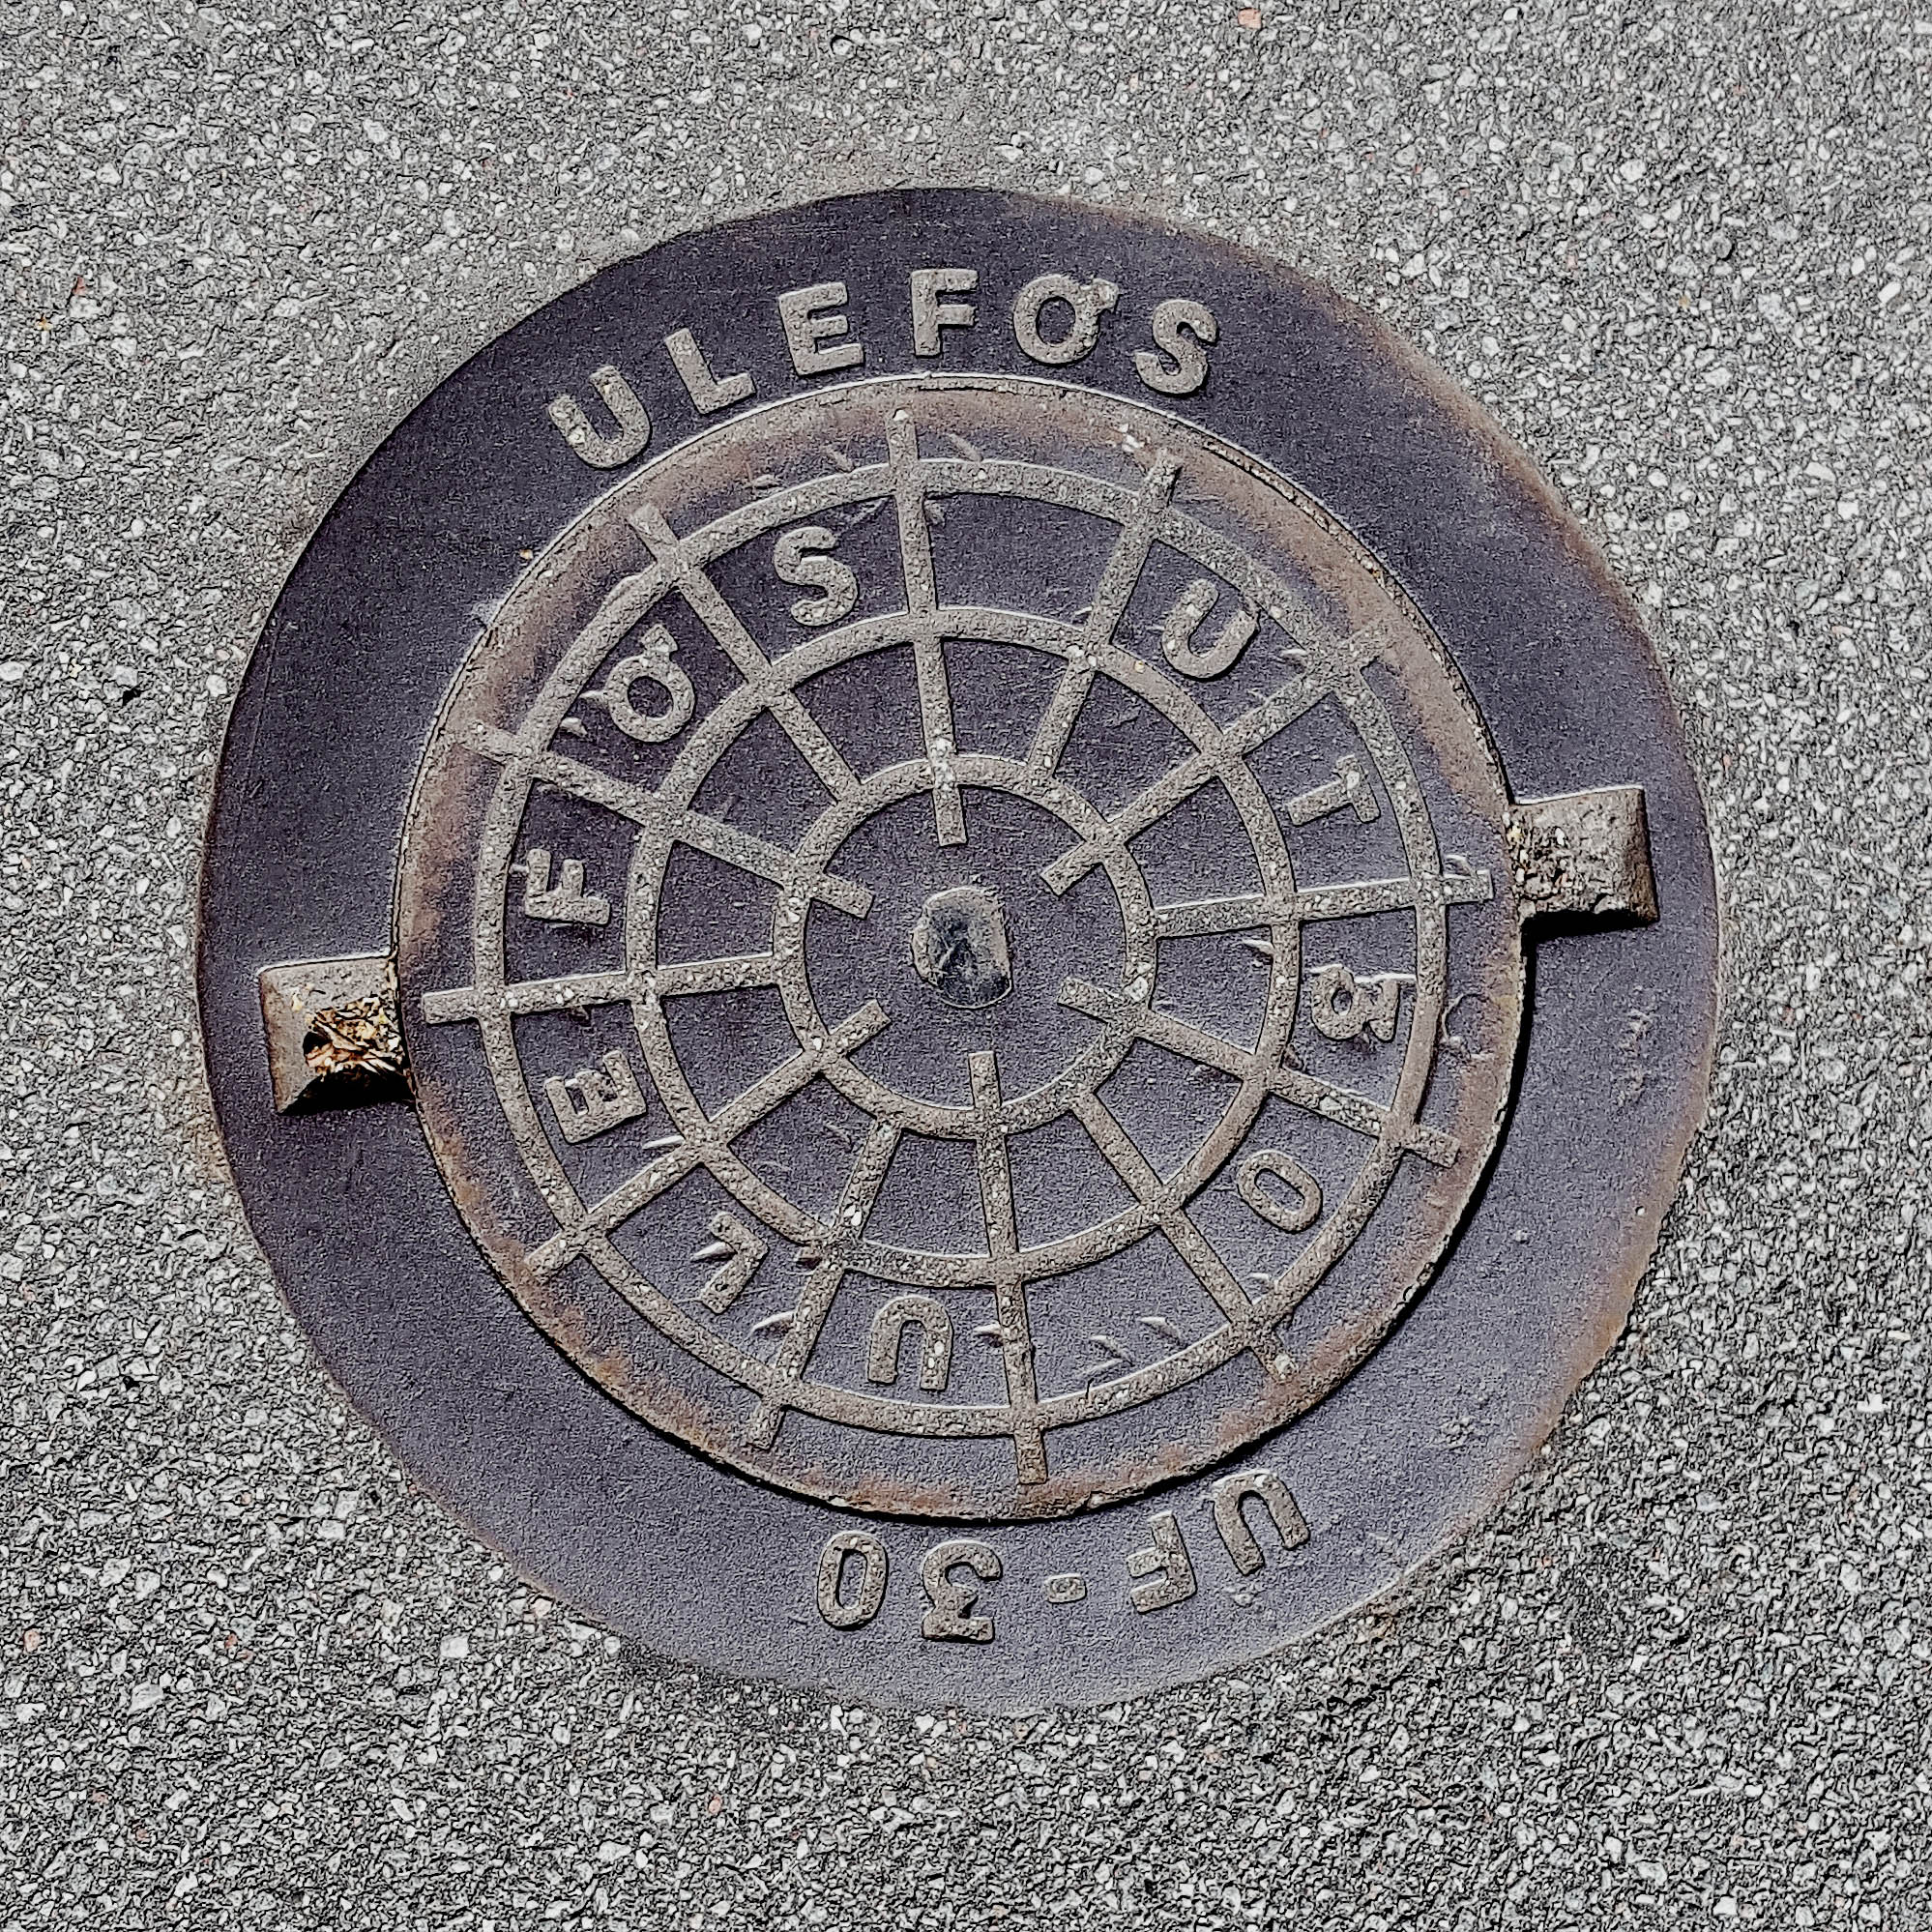 Manhole Cover, Frederiksvark Denmark - Cast iron surround inscribed with Ulefos UF-30 and inner circular grid pattern